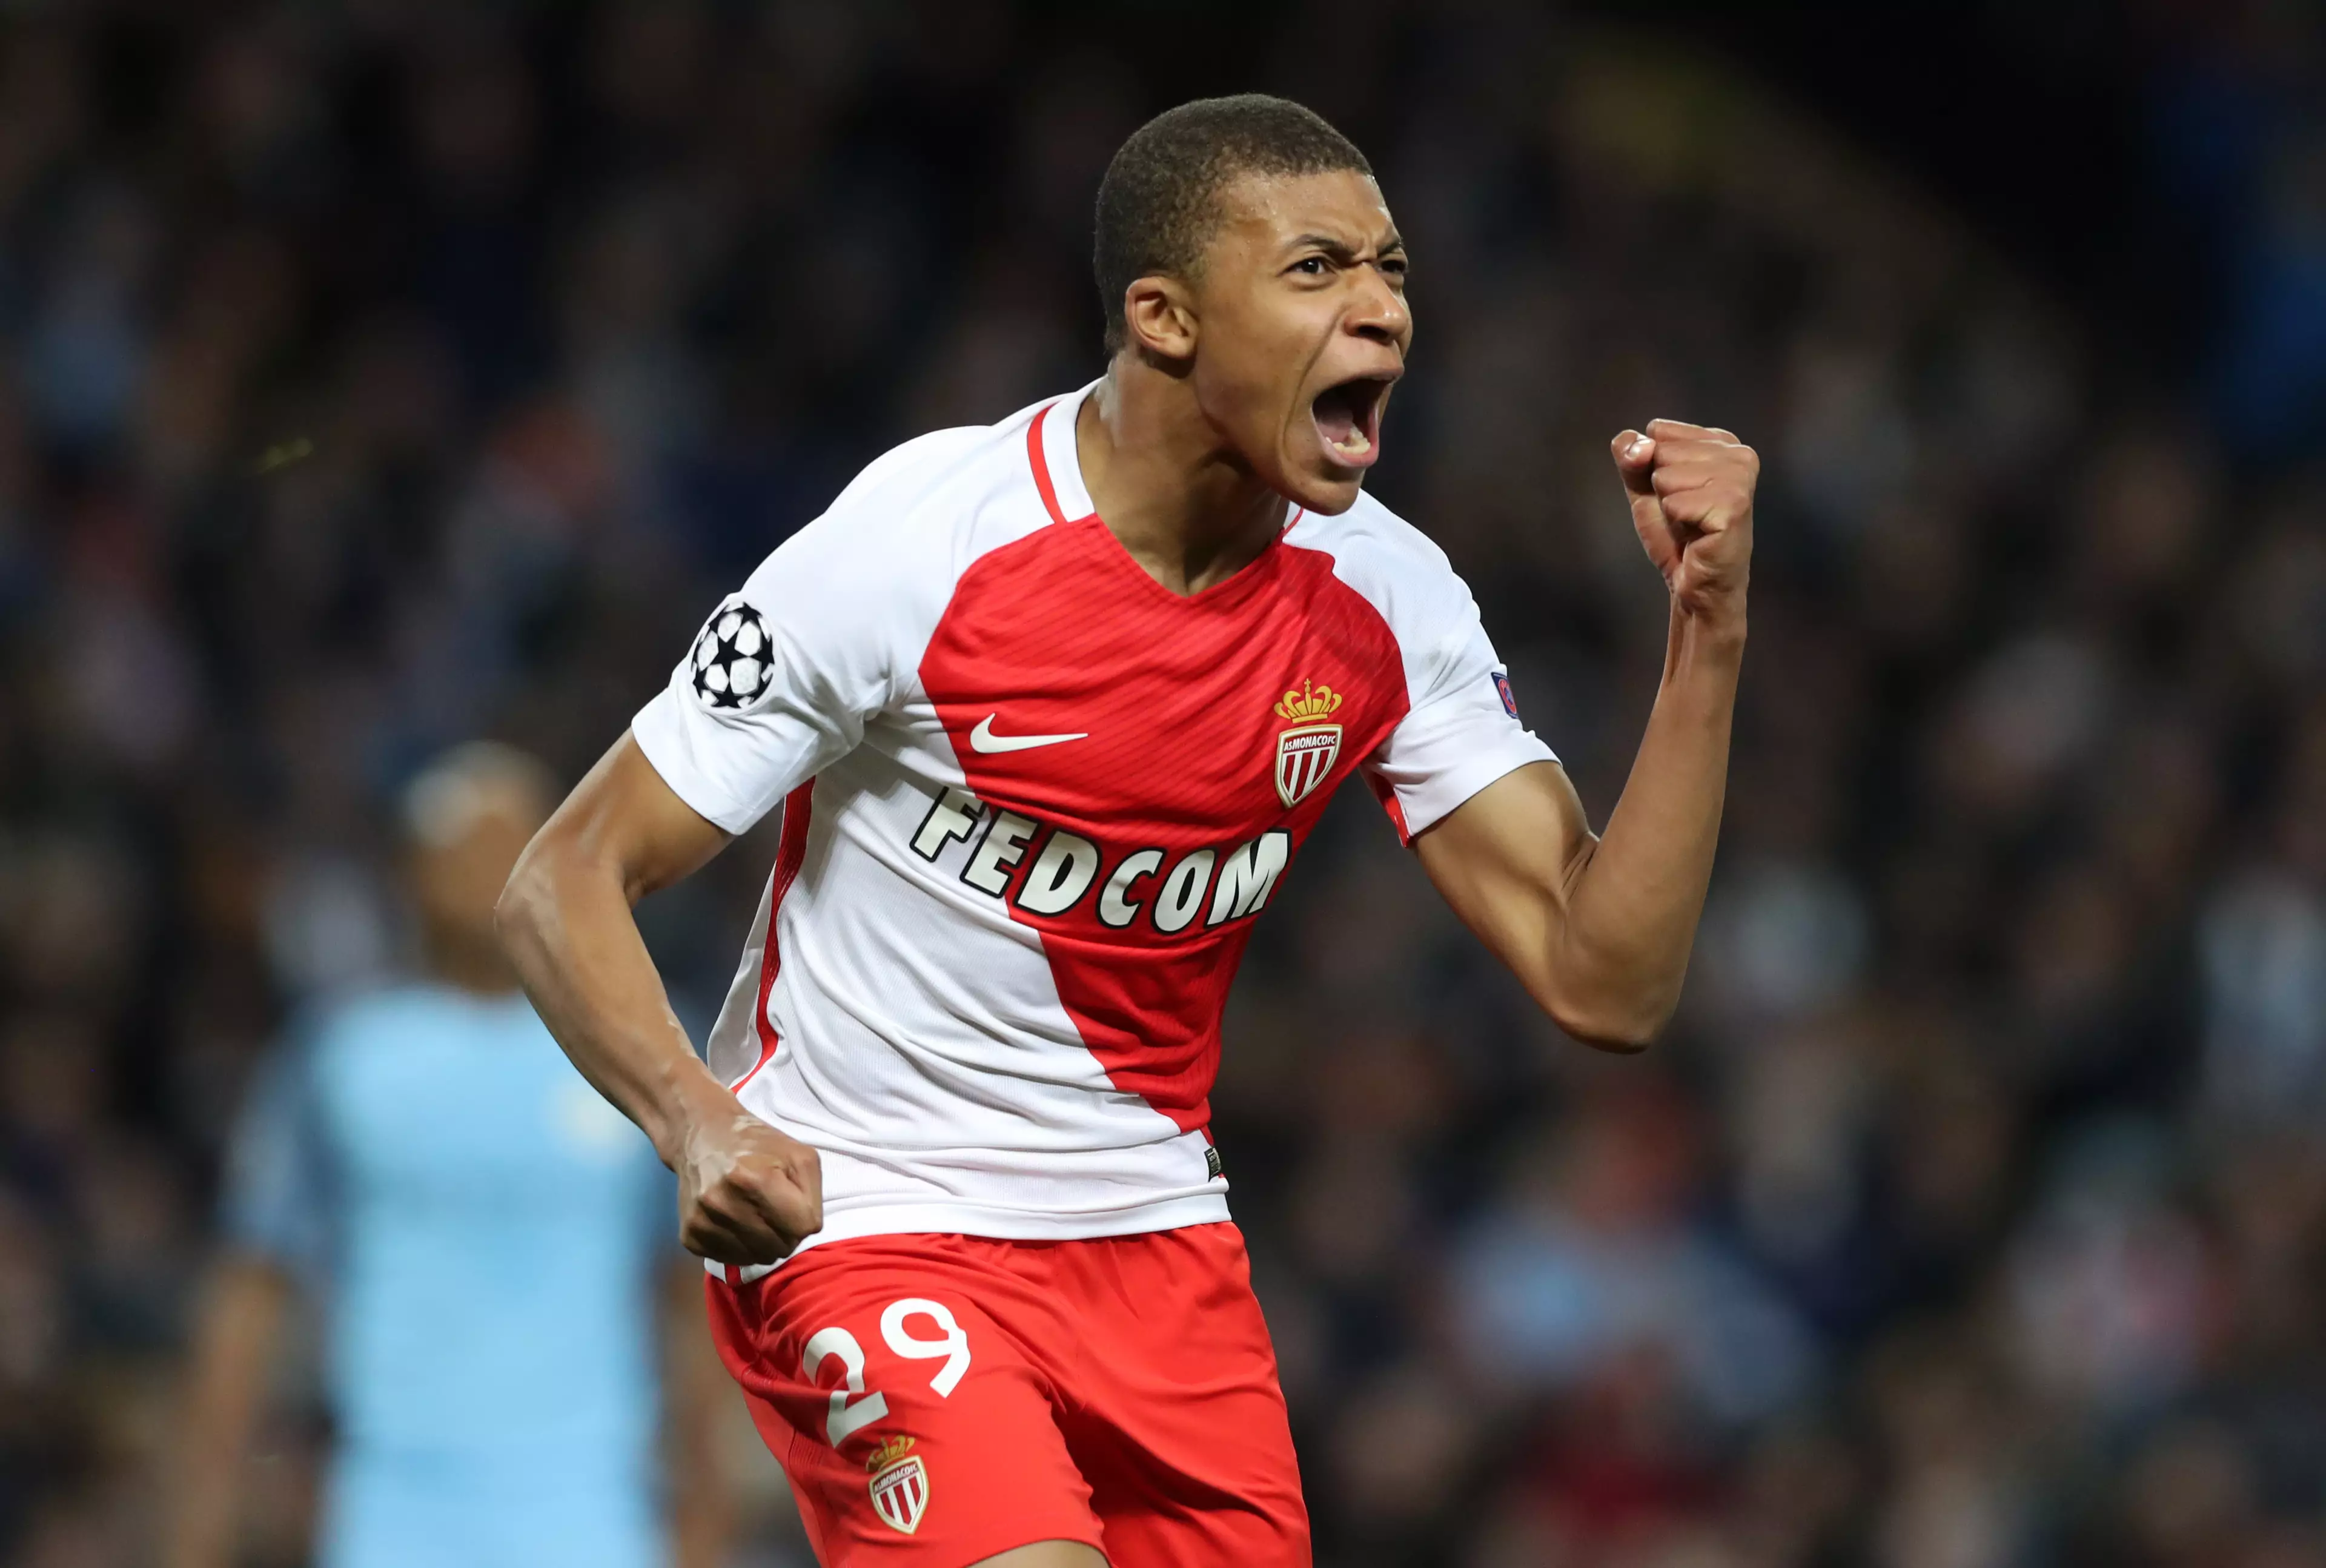 Mbappe became Monaco's youngest ever scorer. Image: PA Images